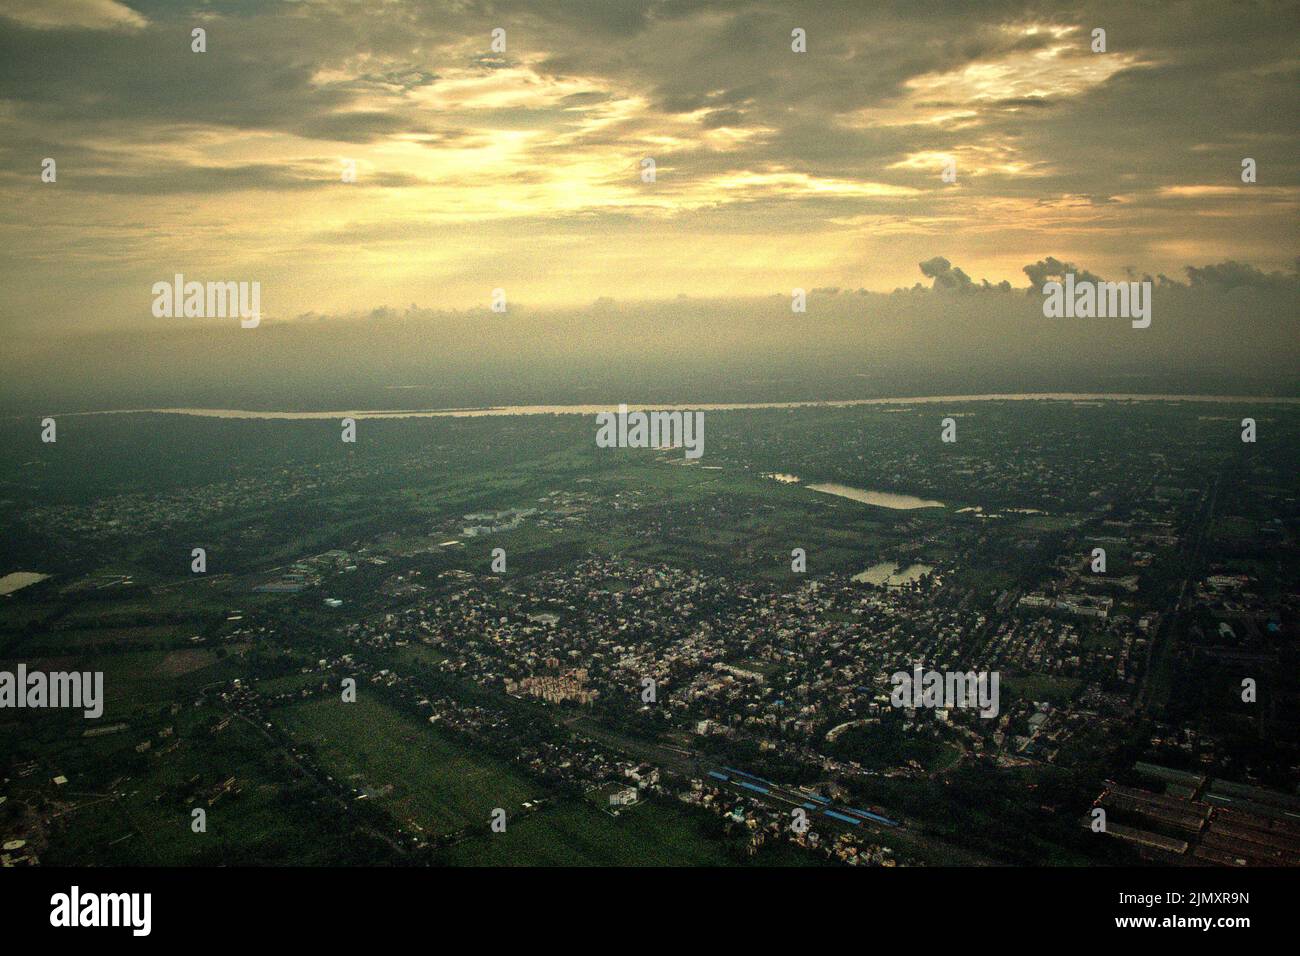 Aerial landscape of a part of Kolkata City and Hooghly river in West Bengal, India. Stock Photo